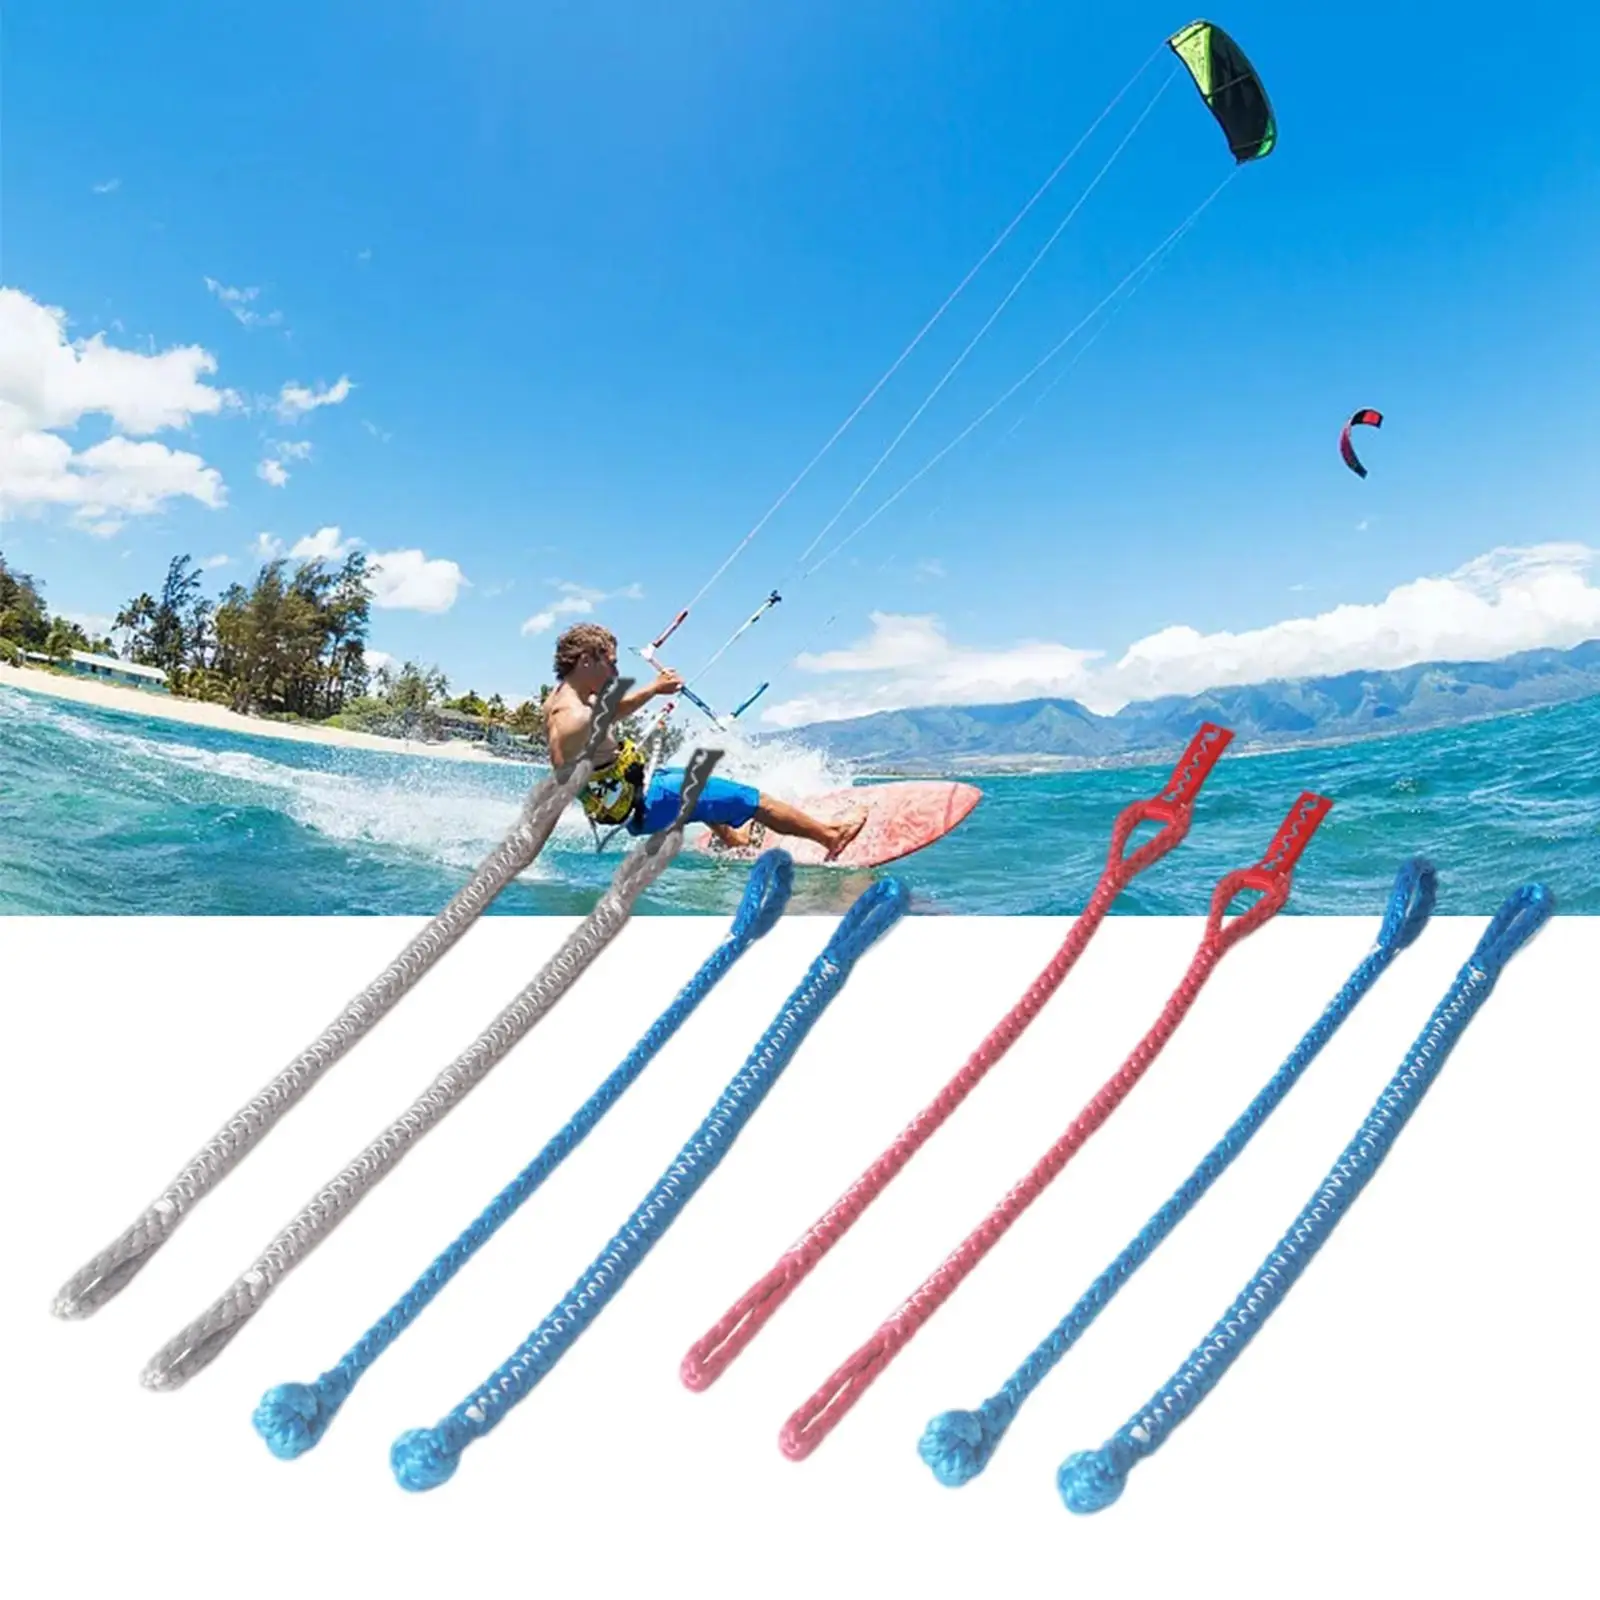 4 Pieces Universal Kiteboarding Pigtails Kitesurfing Replacement Kite Parts